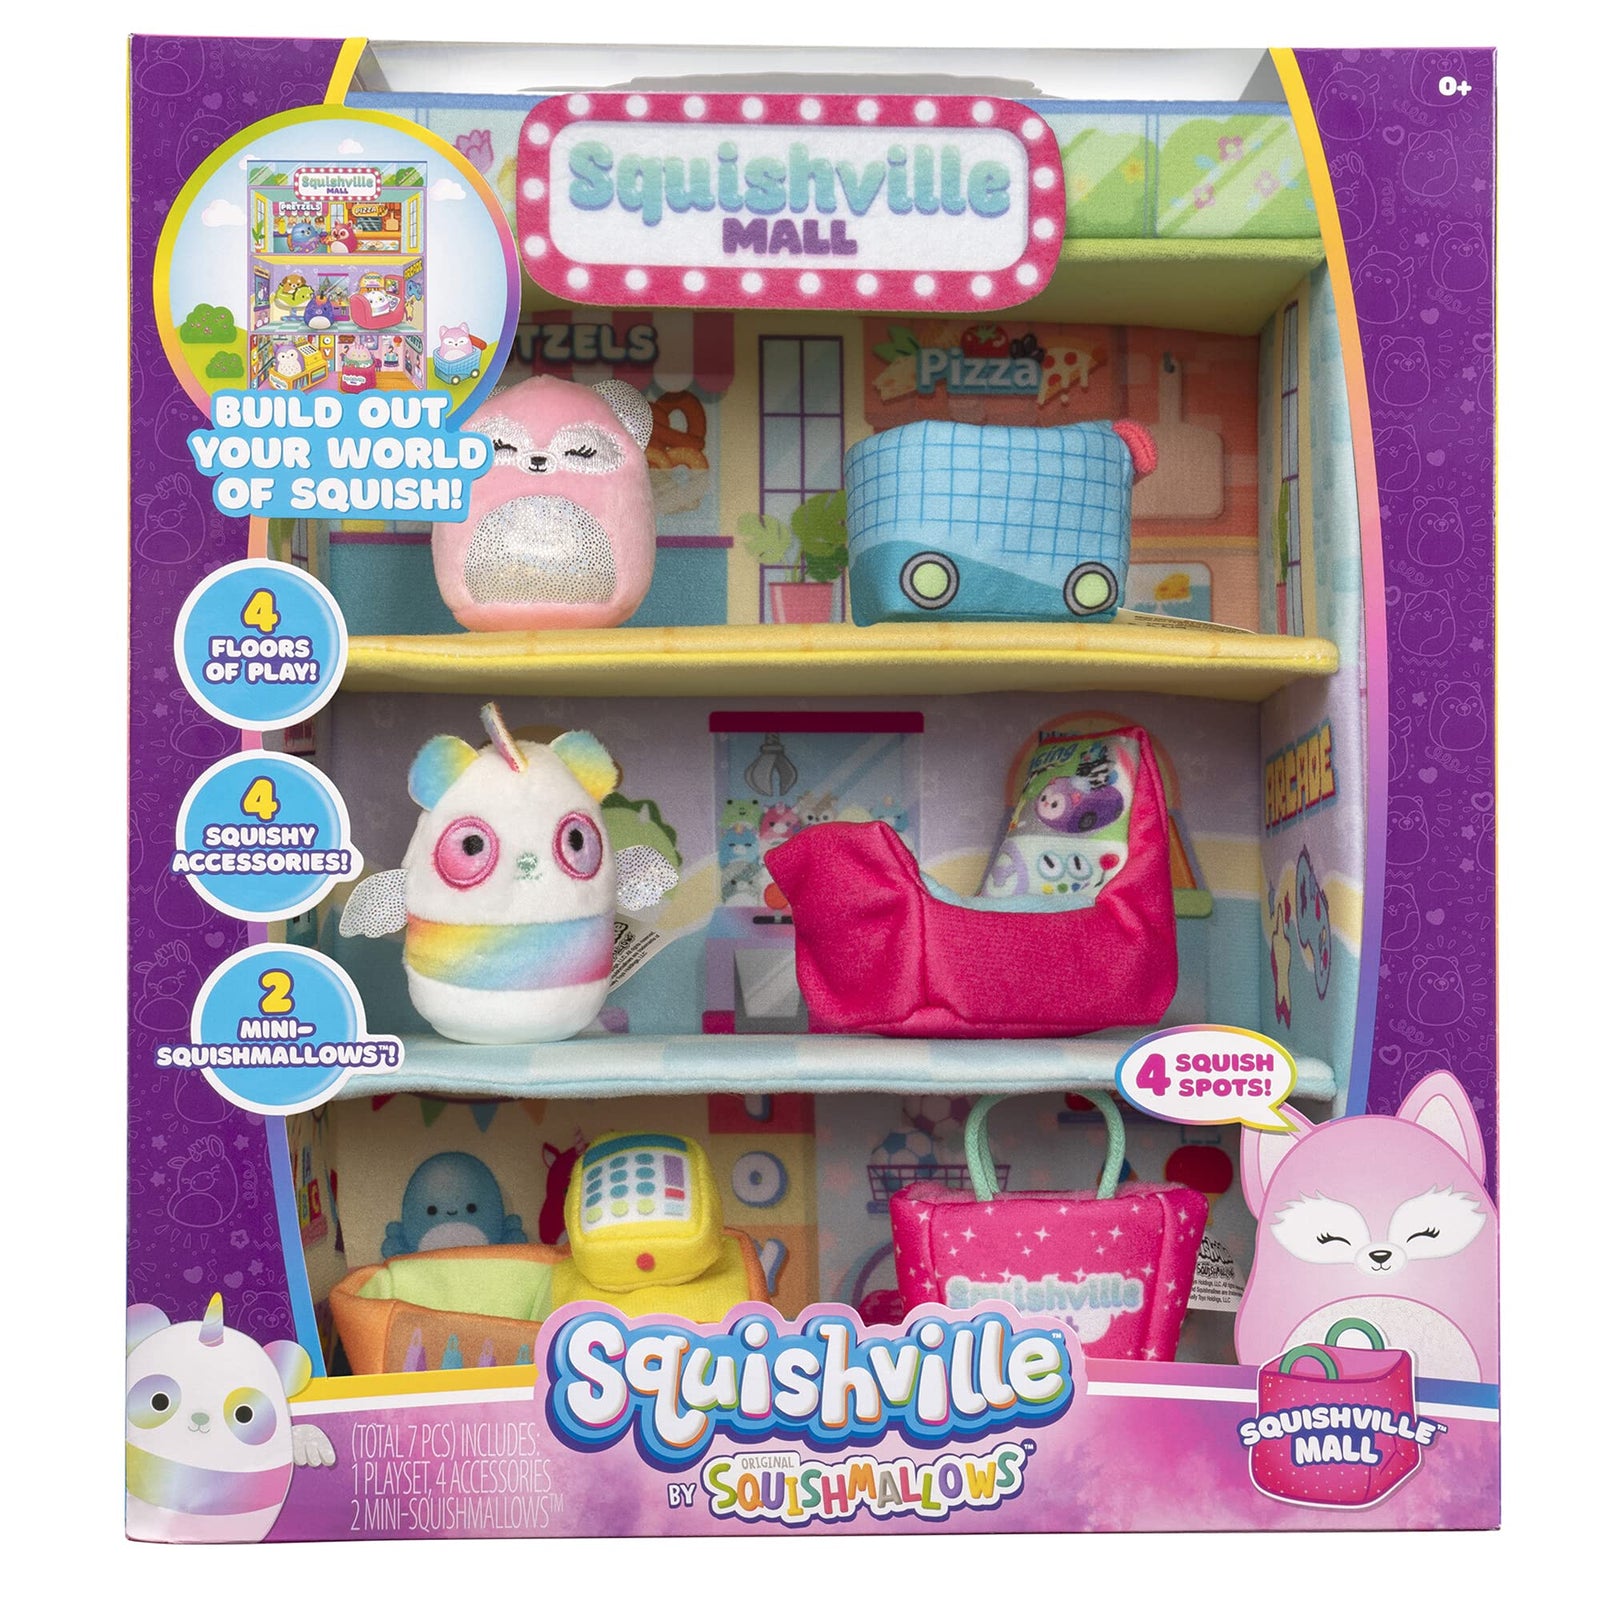 Squishville Squishmallows Mall - Two 2-Inch Mini-Squishmallows Plush Characters, Themed Play Scene, 4 Accessories (Shopping Bag, Shopping Cart, Cash Register, Arcade Machine) - Amazon Exclusive